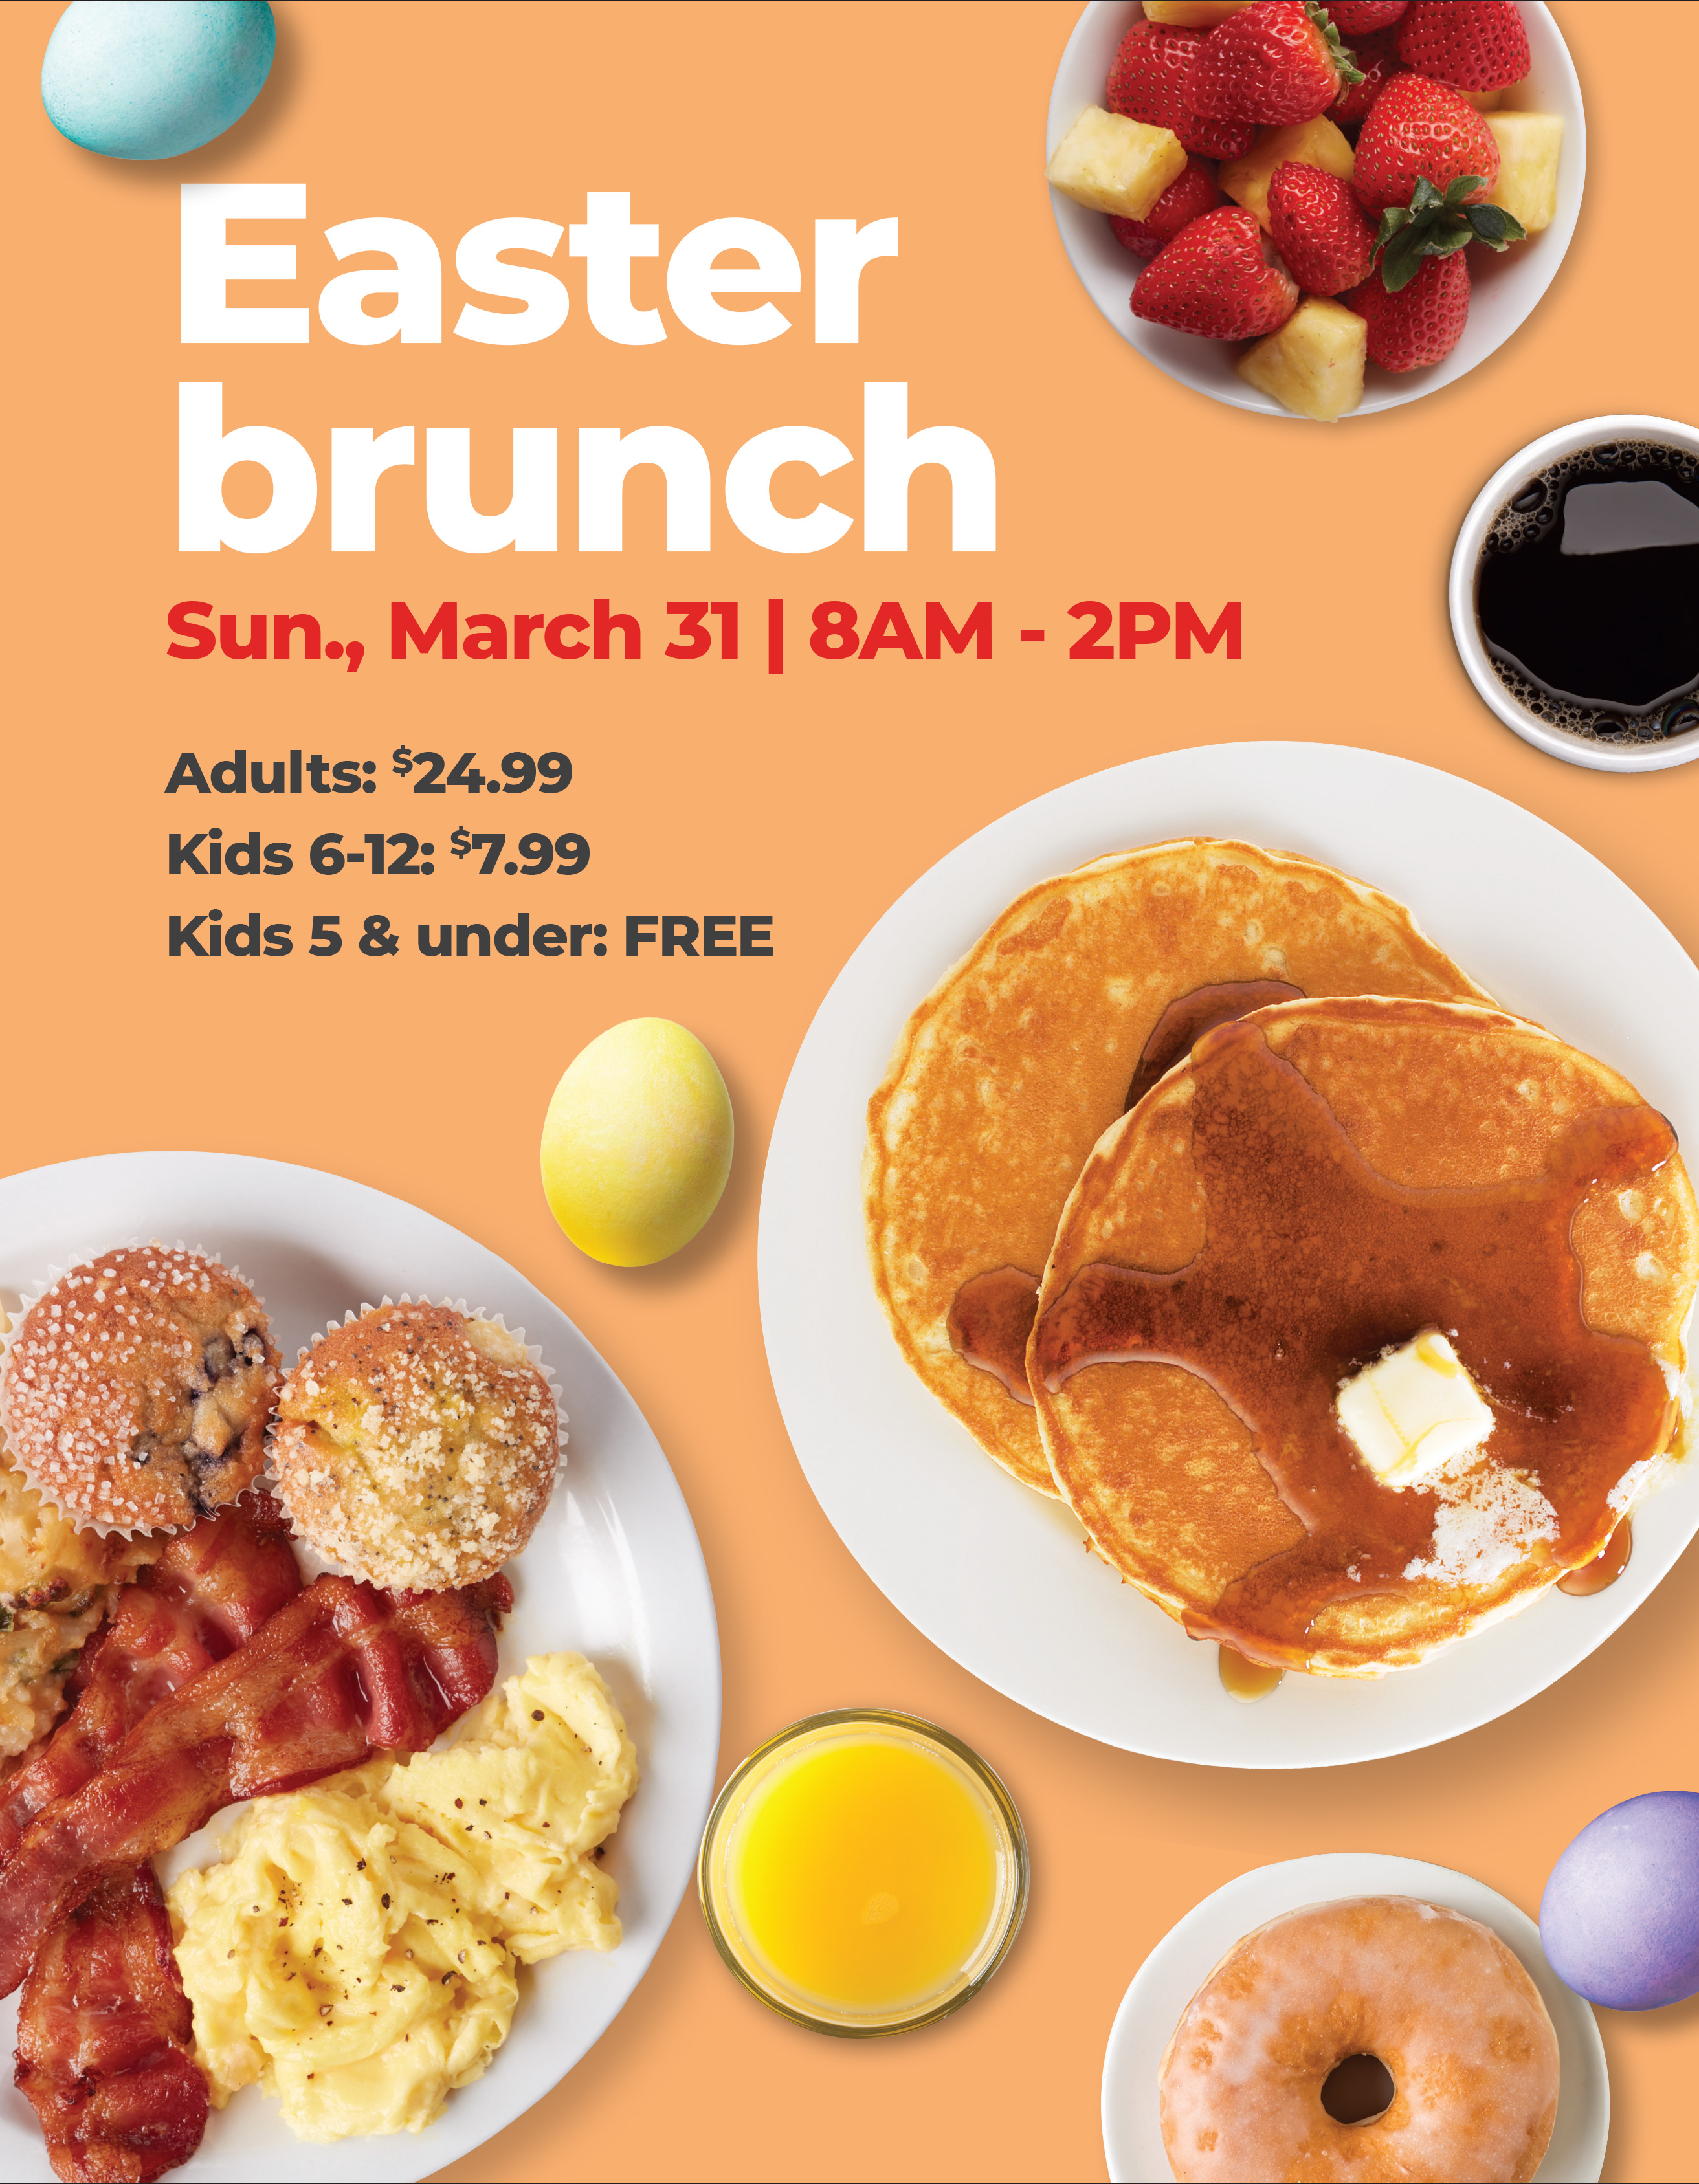 Easter Brunch at HyVee Company HyVee Your employeeowned